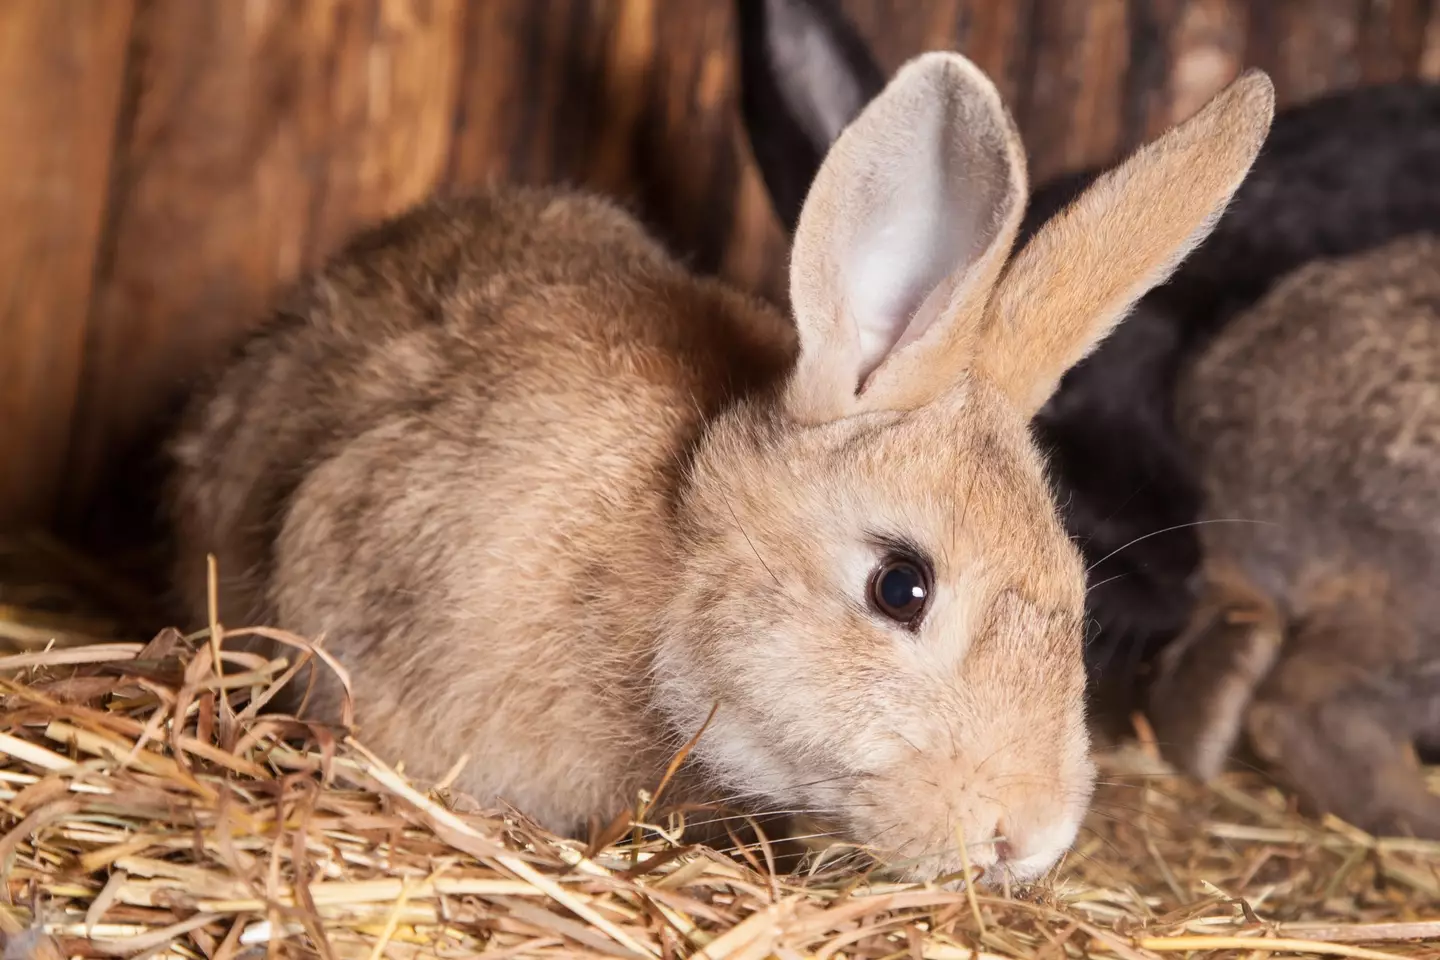 Owners should contact a vet if their rabbit is showing signs of heatstroke.